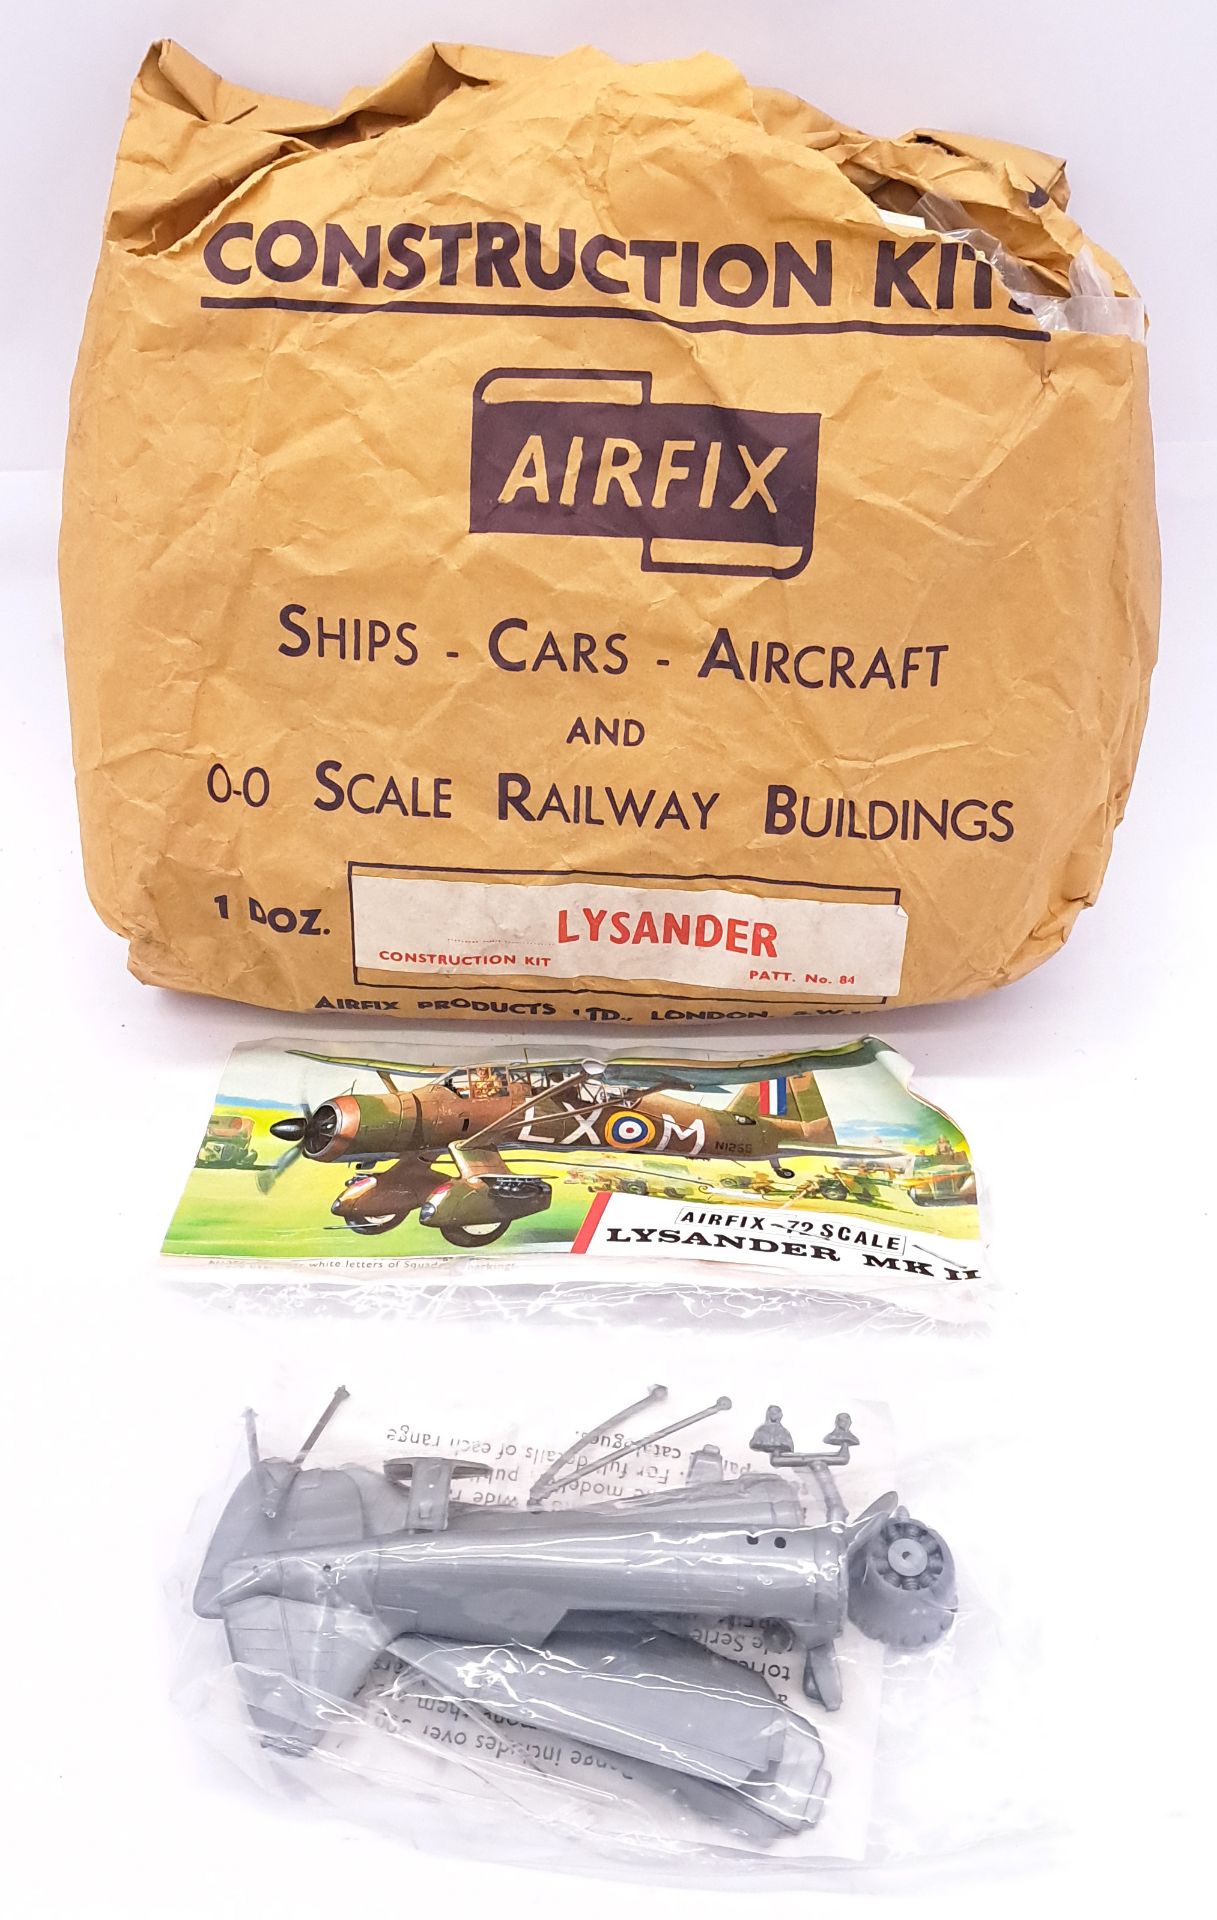 Airfix c1960’s ORIGINAL TRADE BAG complete with Bagged Type 3 “Lysander” Kits